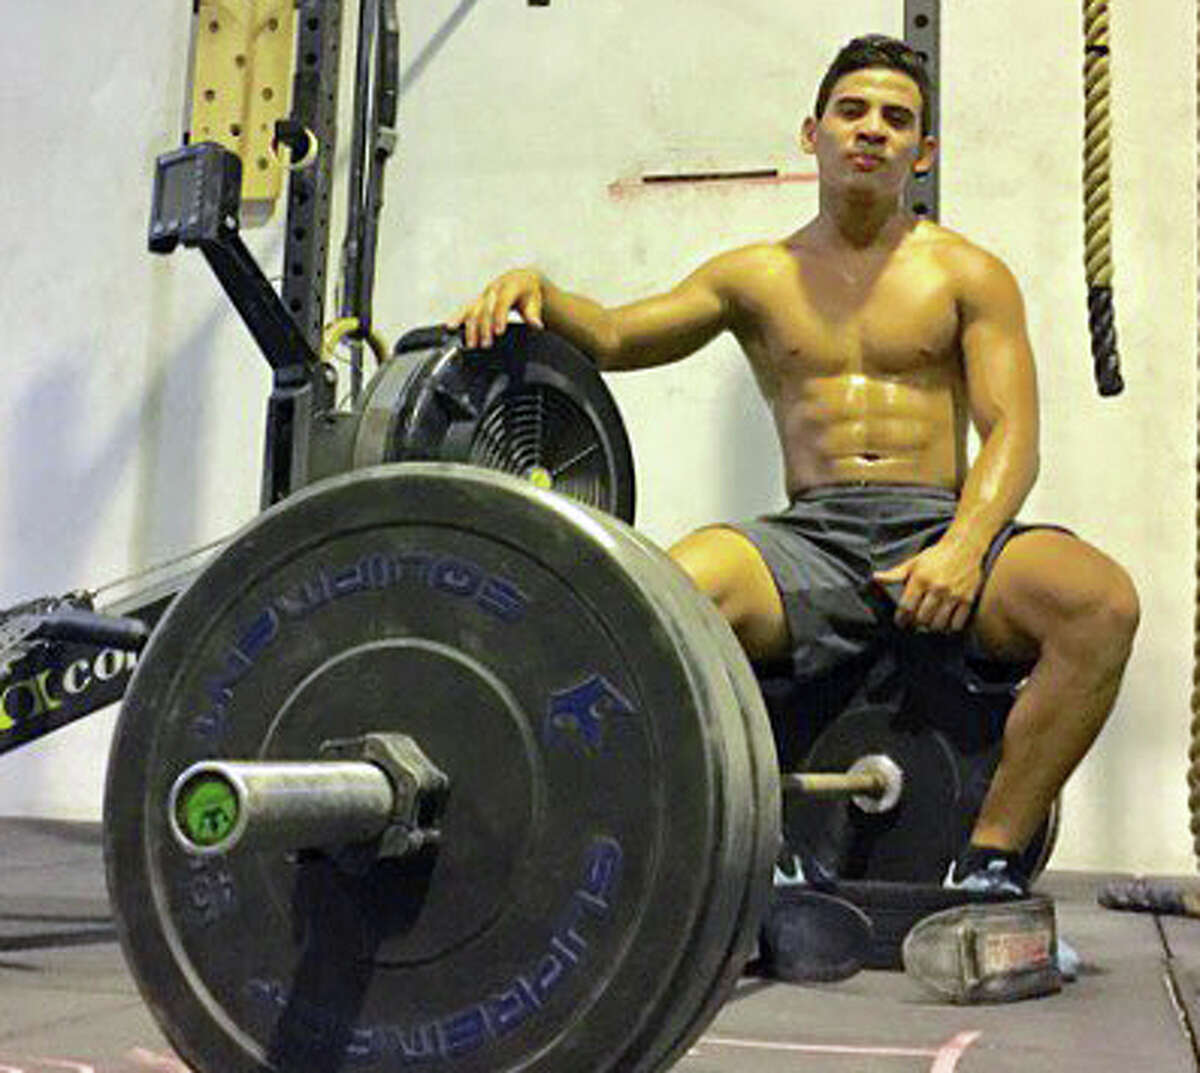 Wilson Roman, 17, beat out tens of thousands of competitors to win a spot in the international CrossFit Games in Madison, Wisconsin. He is struggling to secure a visa that would allow him to travel to the United States for the August events. (Courtesy of trainer Connor Martin)